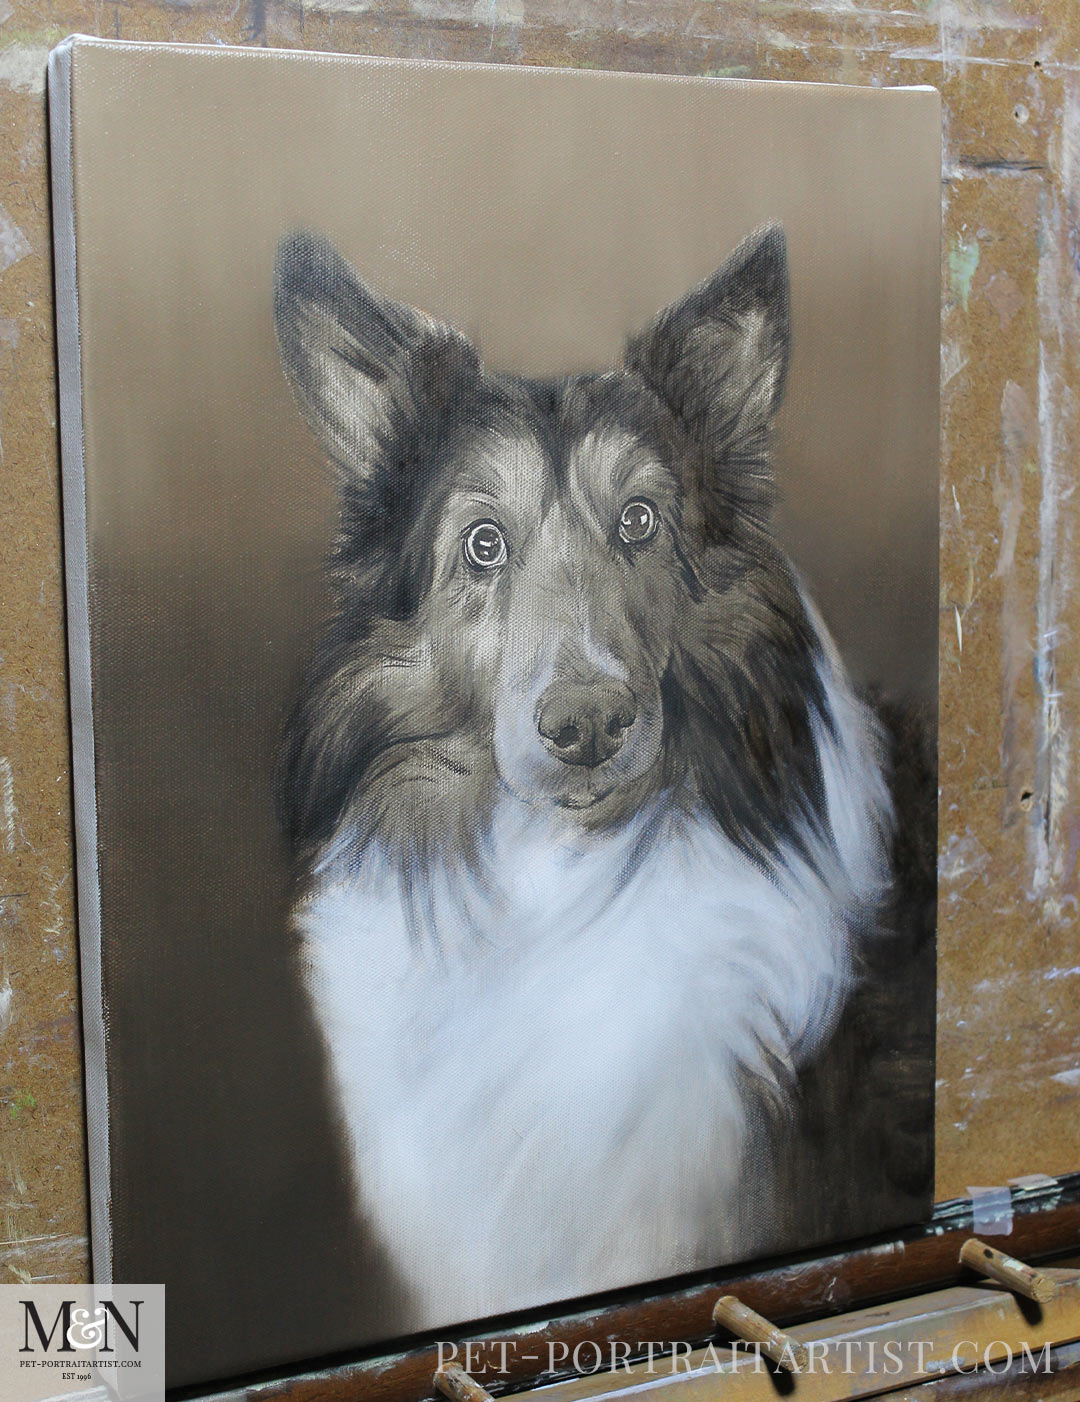 Early stage for the portrait of Joey